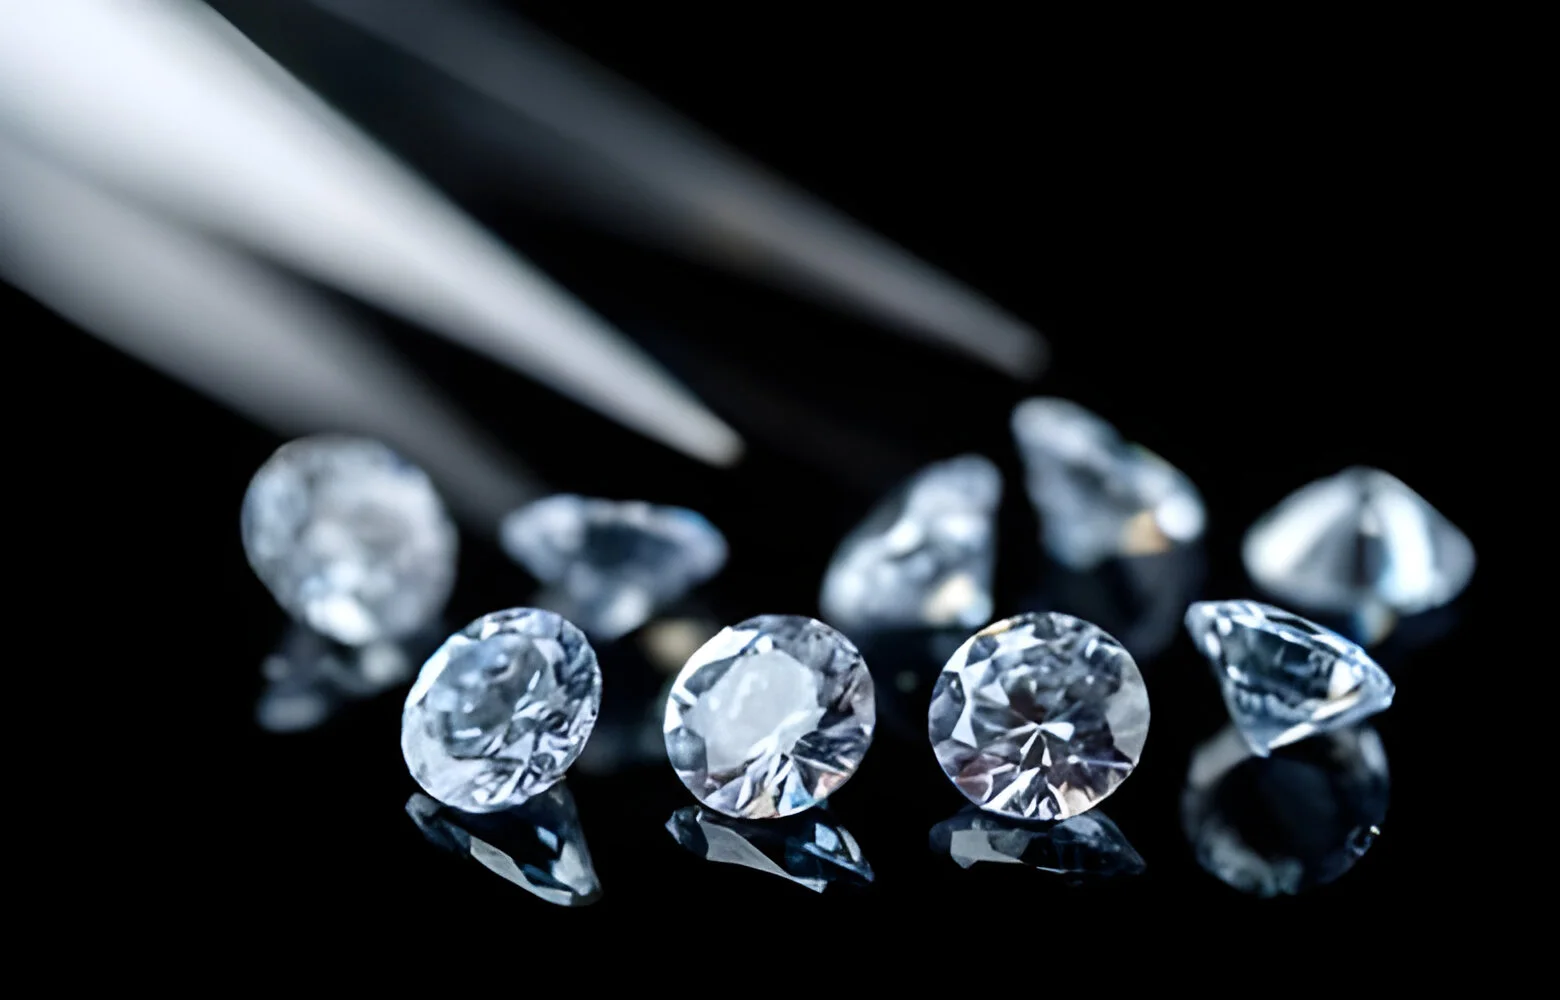 Dimond Features & Specification in detail